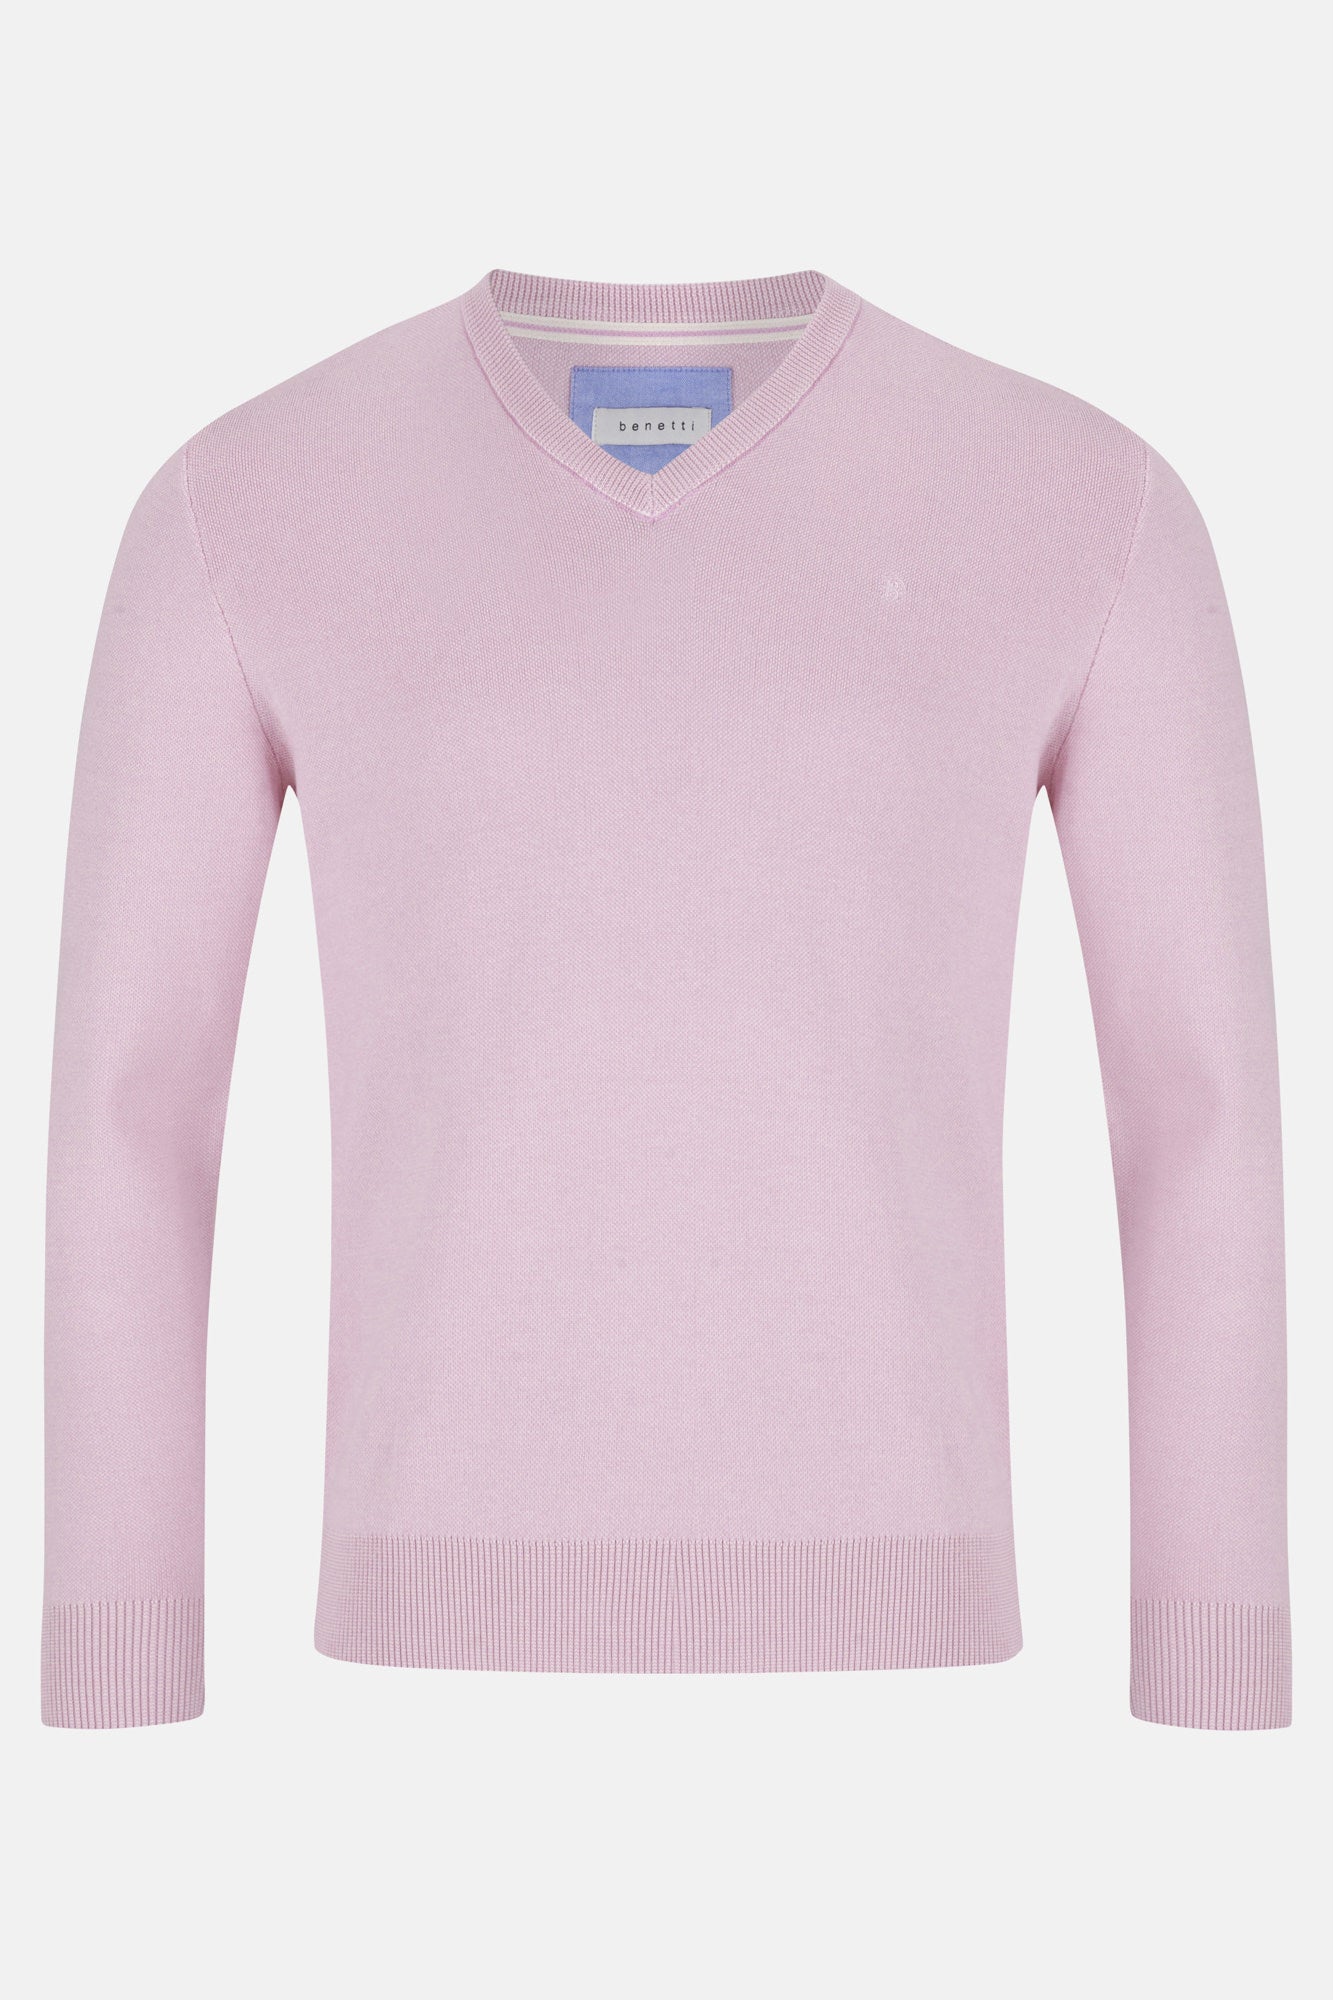 Gale Rose V Neck Sweater By Benetti Menswear 